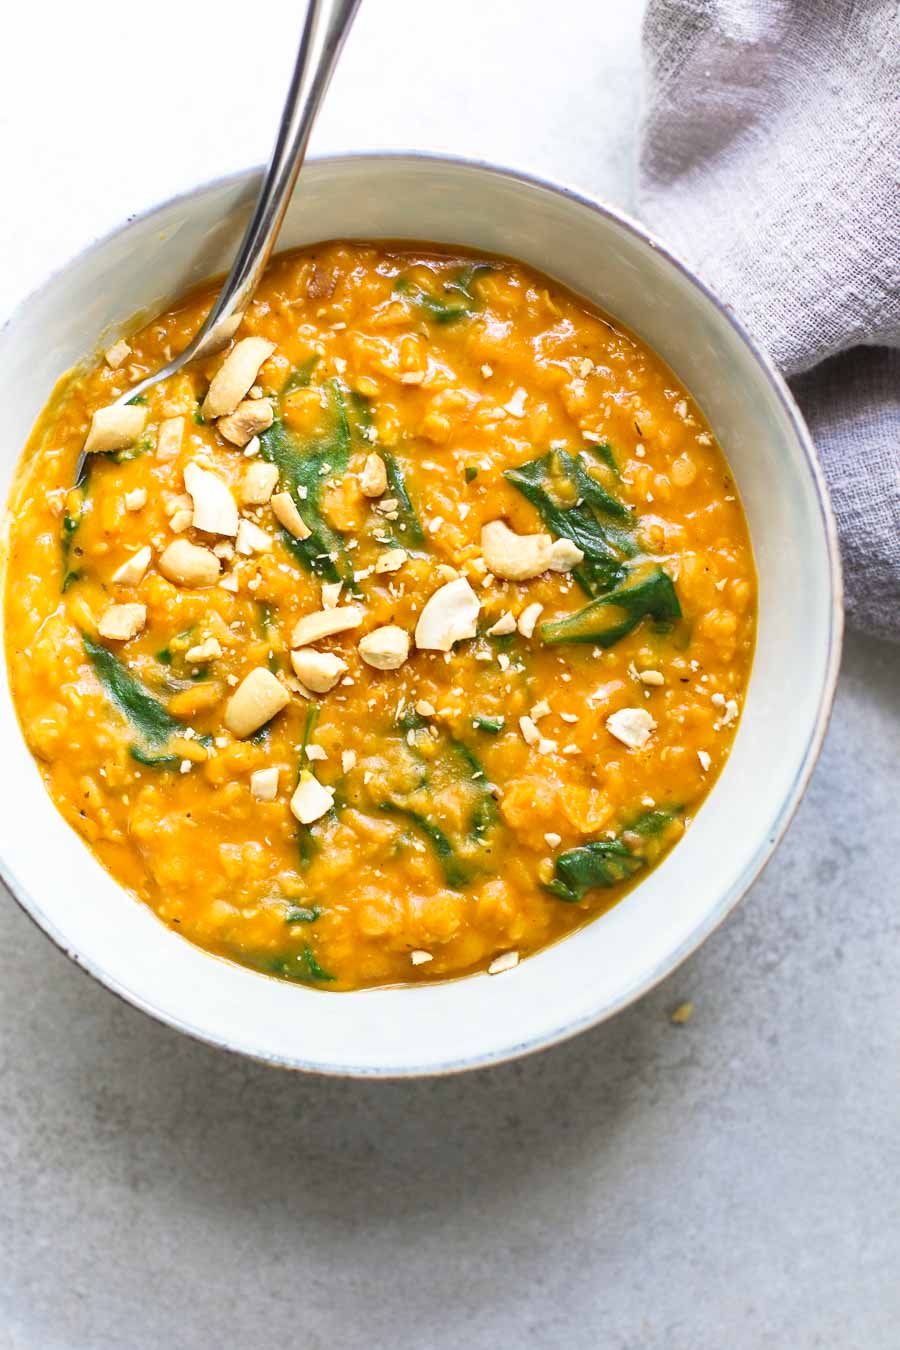 Pumpkin Lentil Curry in a bowl with cashews in a gray bowl with gray napkin